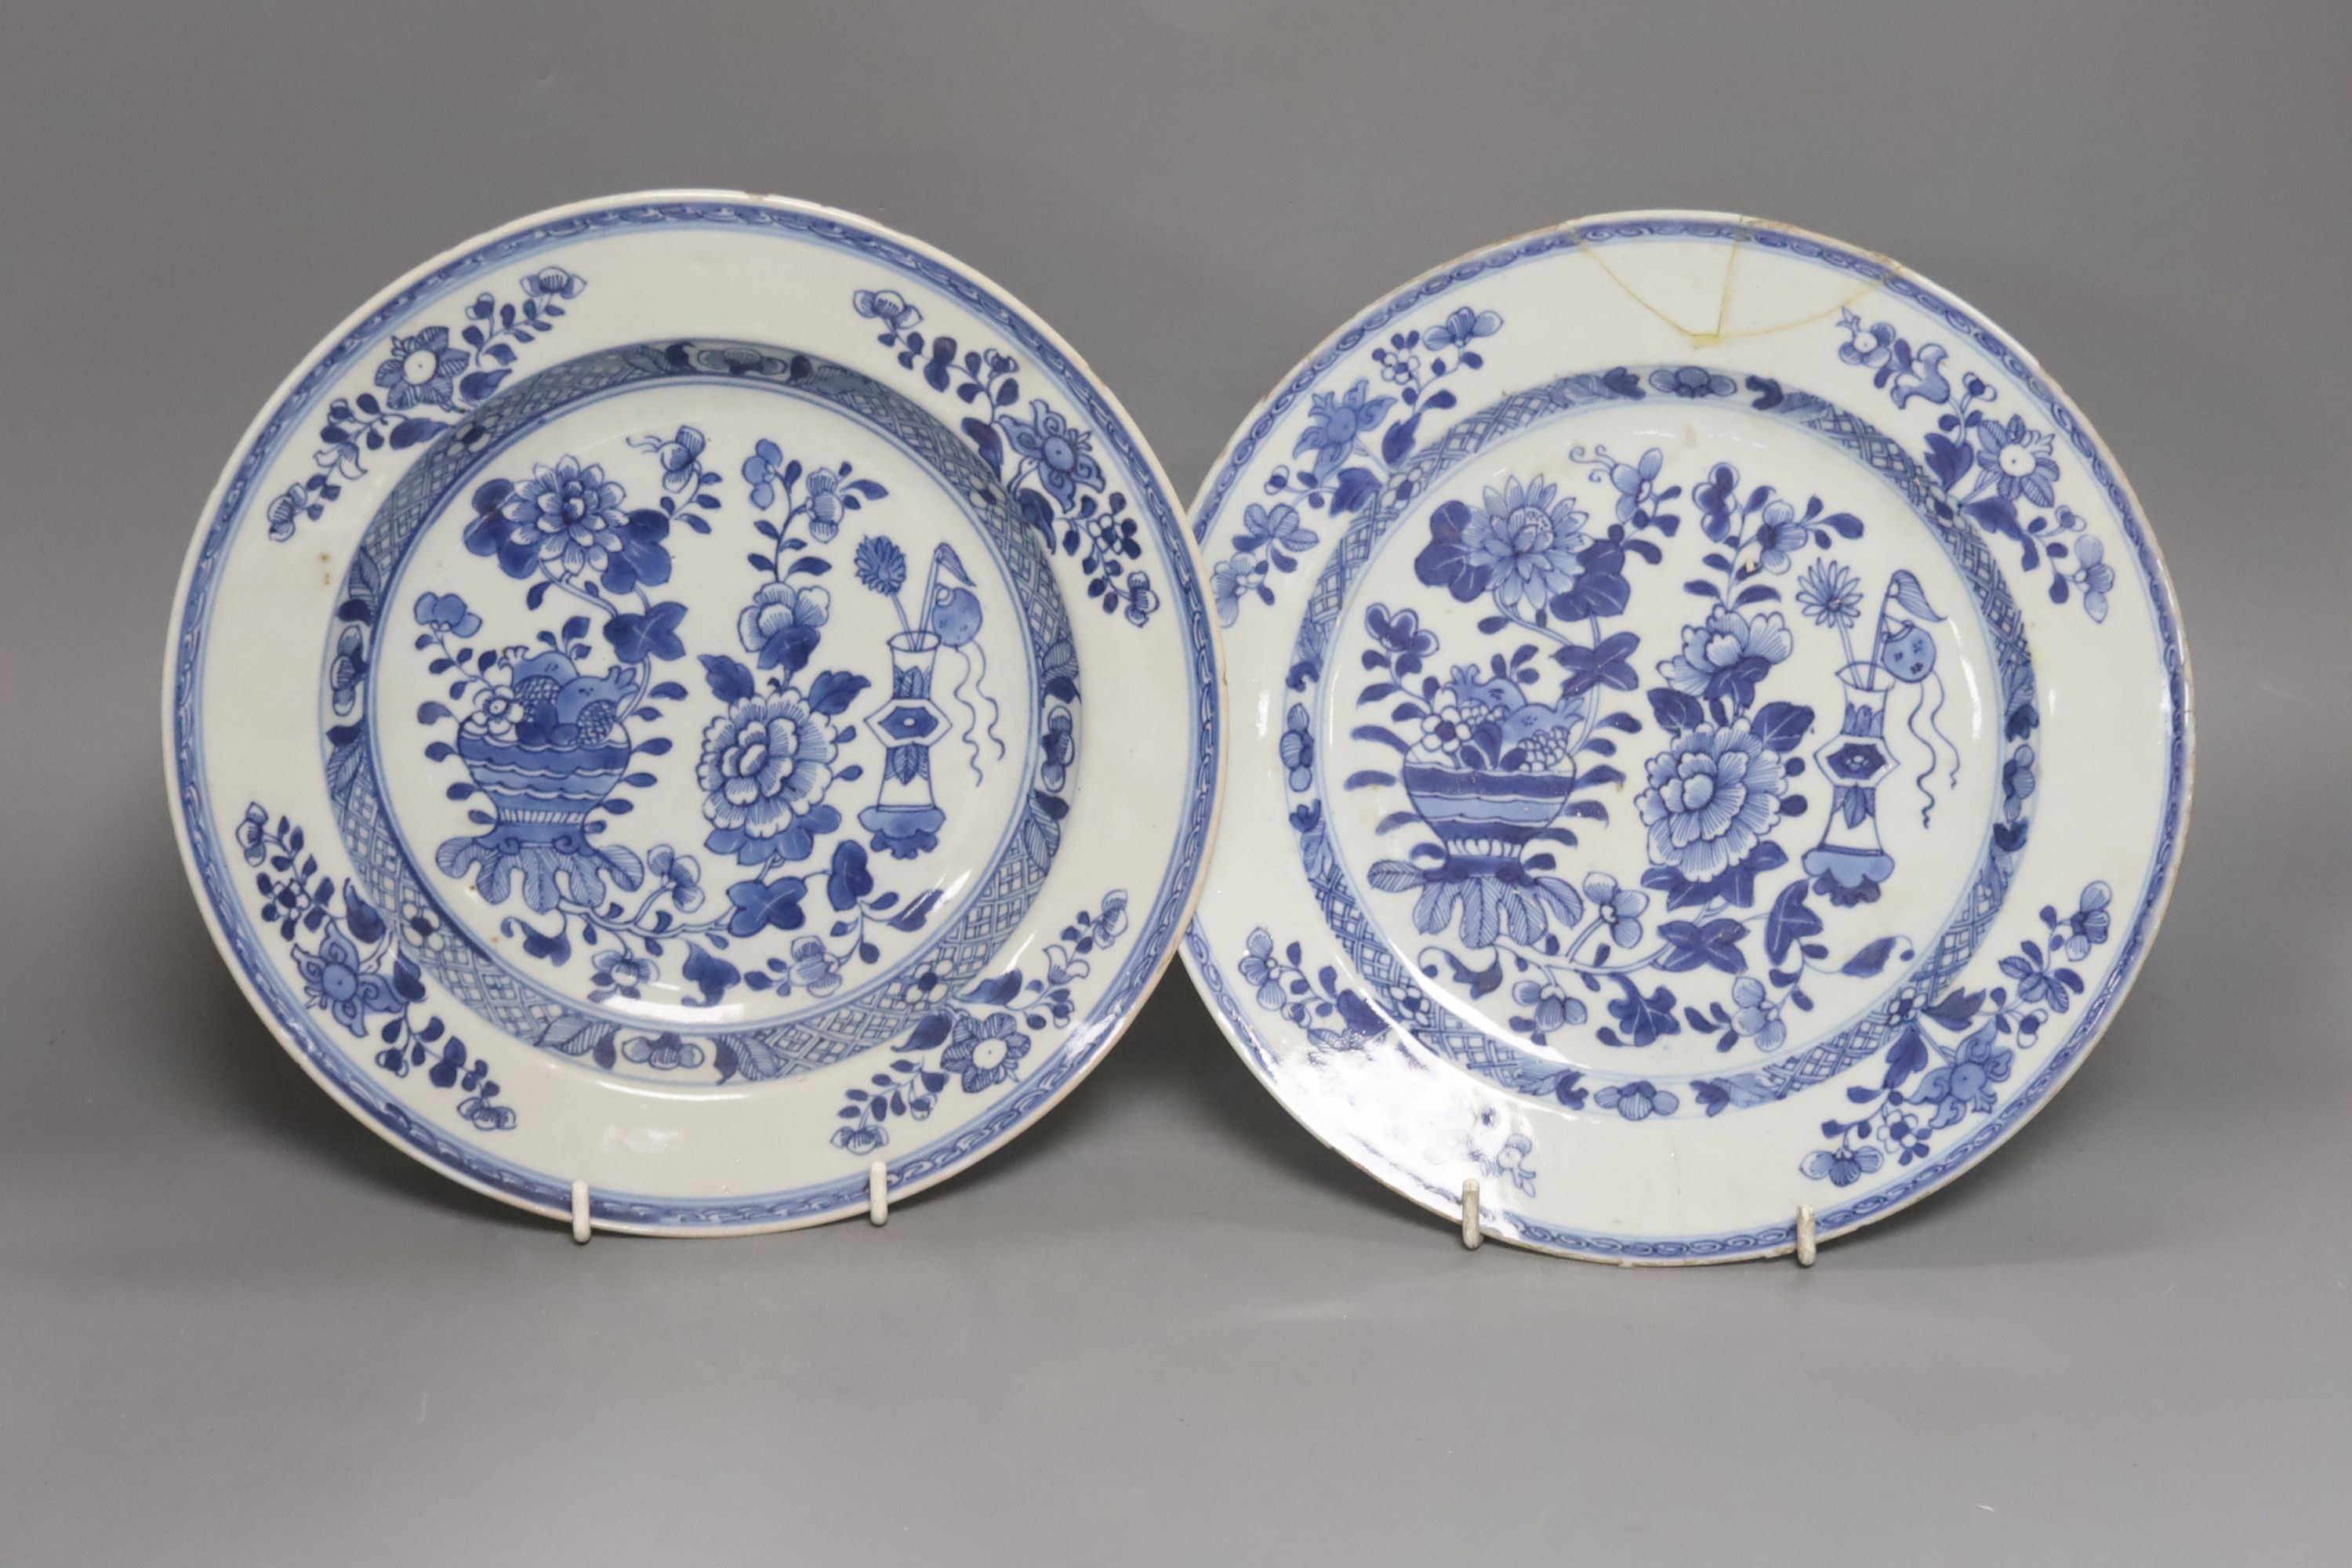 Six 18th century Chinese Export blue and white dishes with floral decoration and five matching plates, Dia 23cm